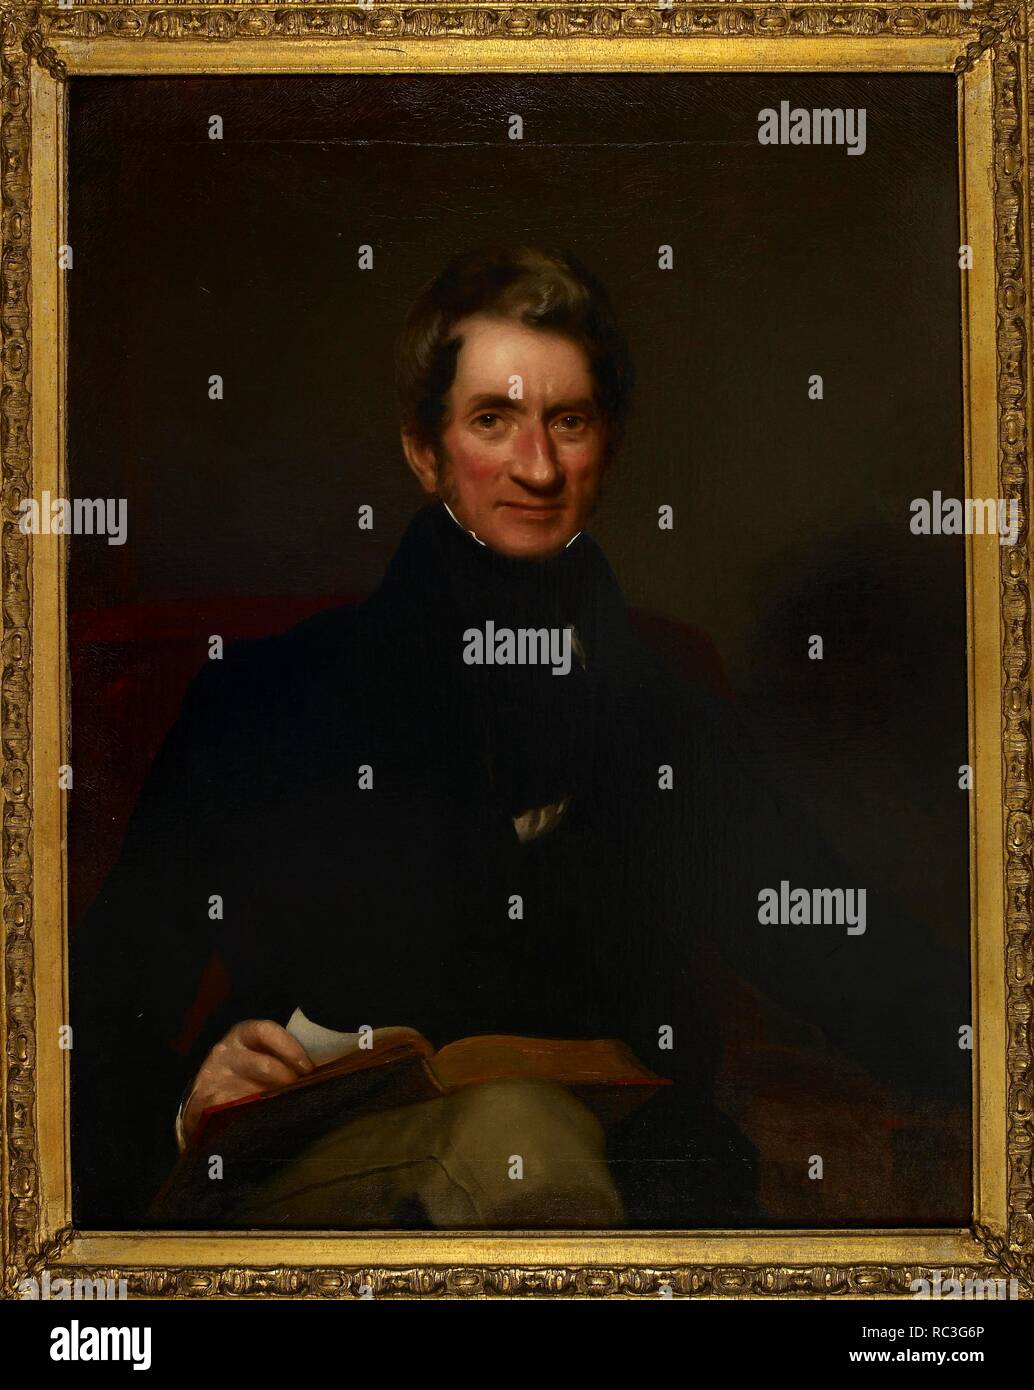 Portrait of Wigram Money. Portrait of Wigram Money (1784-1856), Bengal Civil Service, seated three quarter length looking to his right. oil paint canvas. Oil on canvas; 90 by 69.5 cm. 1840 - 1845 European school. British school. . Source: Foster 1052. Author: Sant, James. Stock Photo